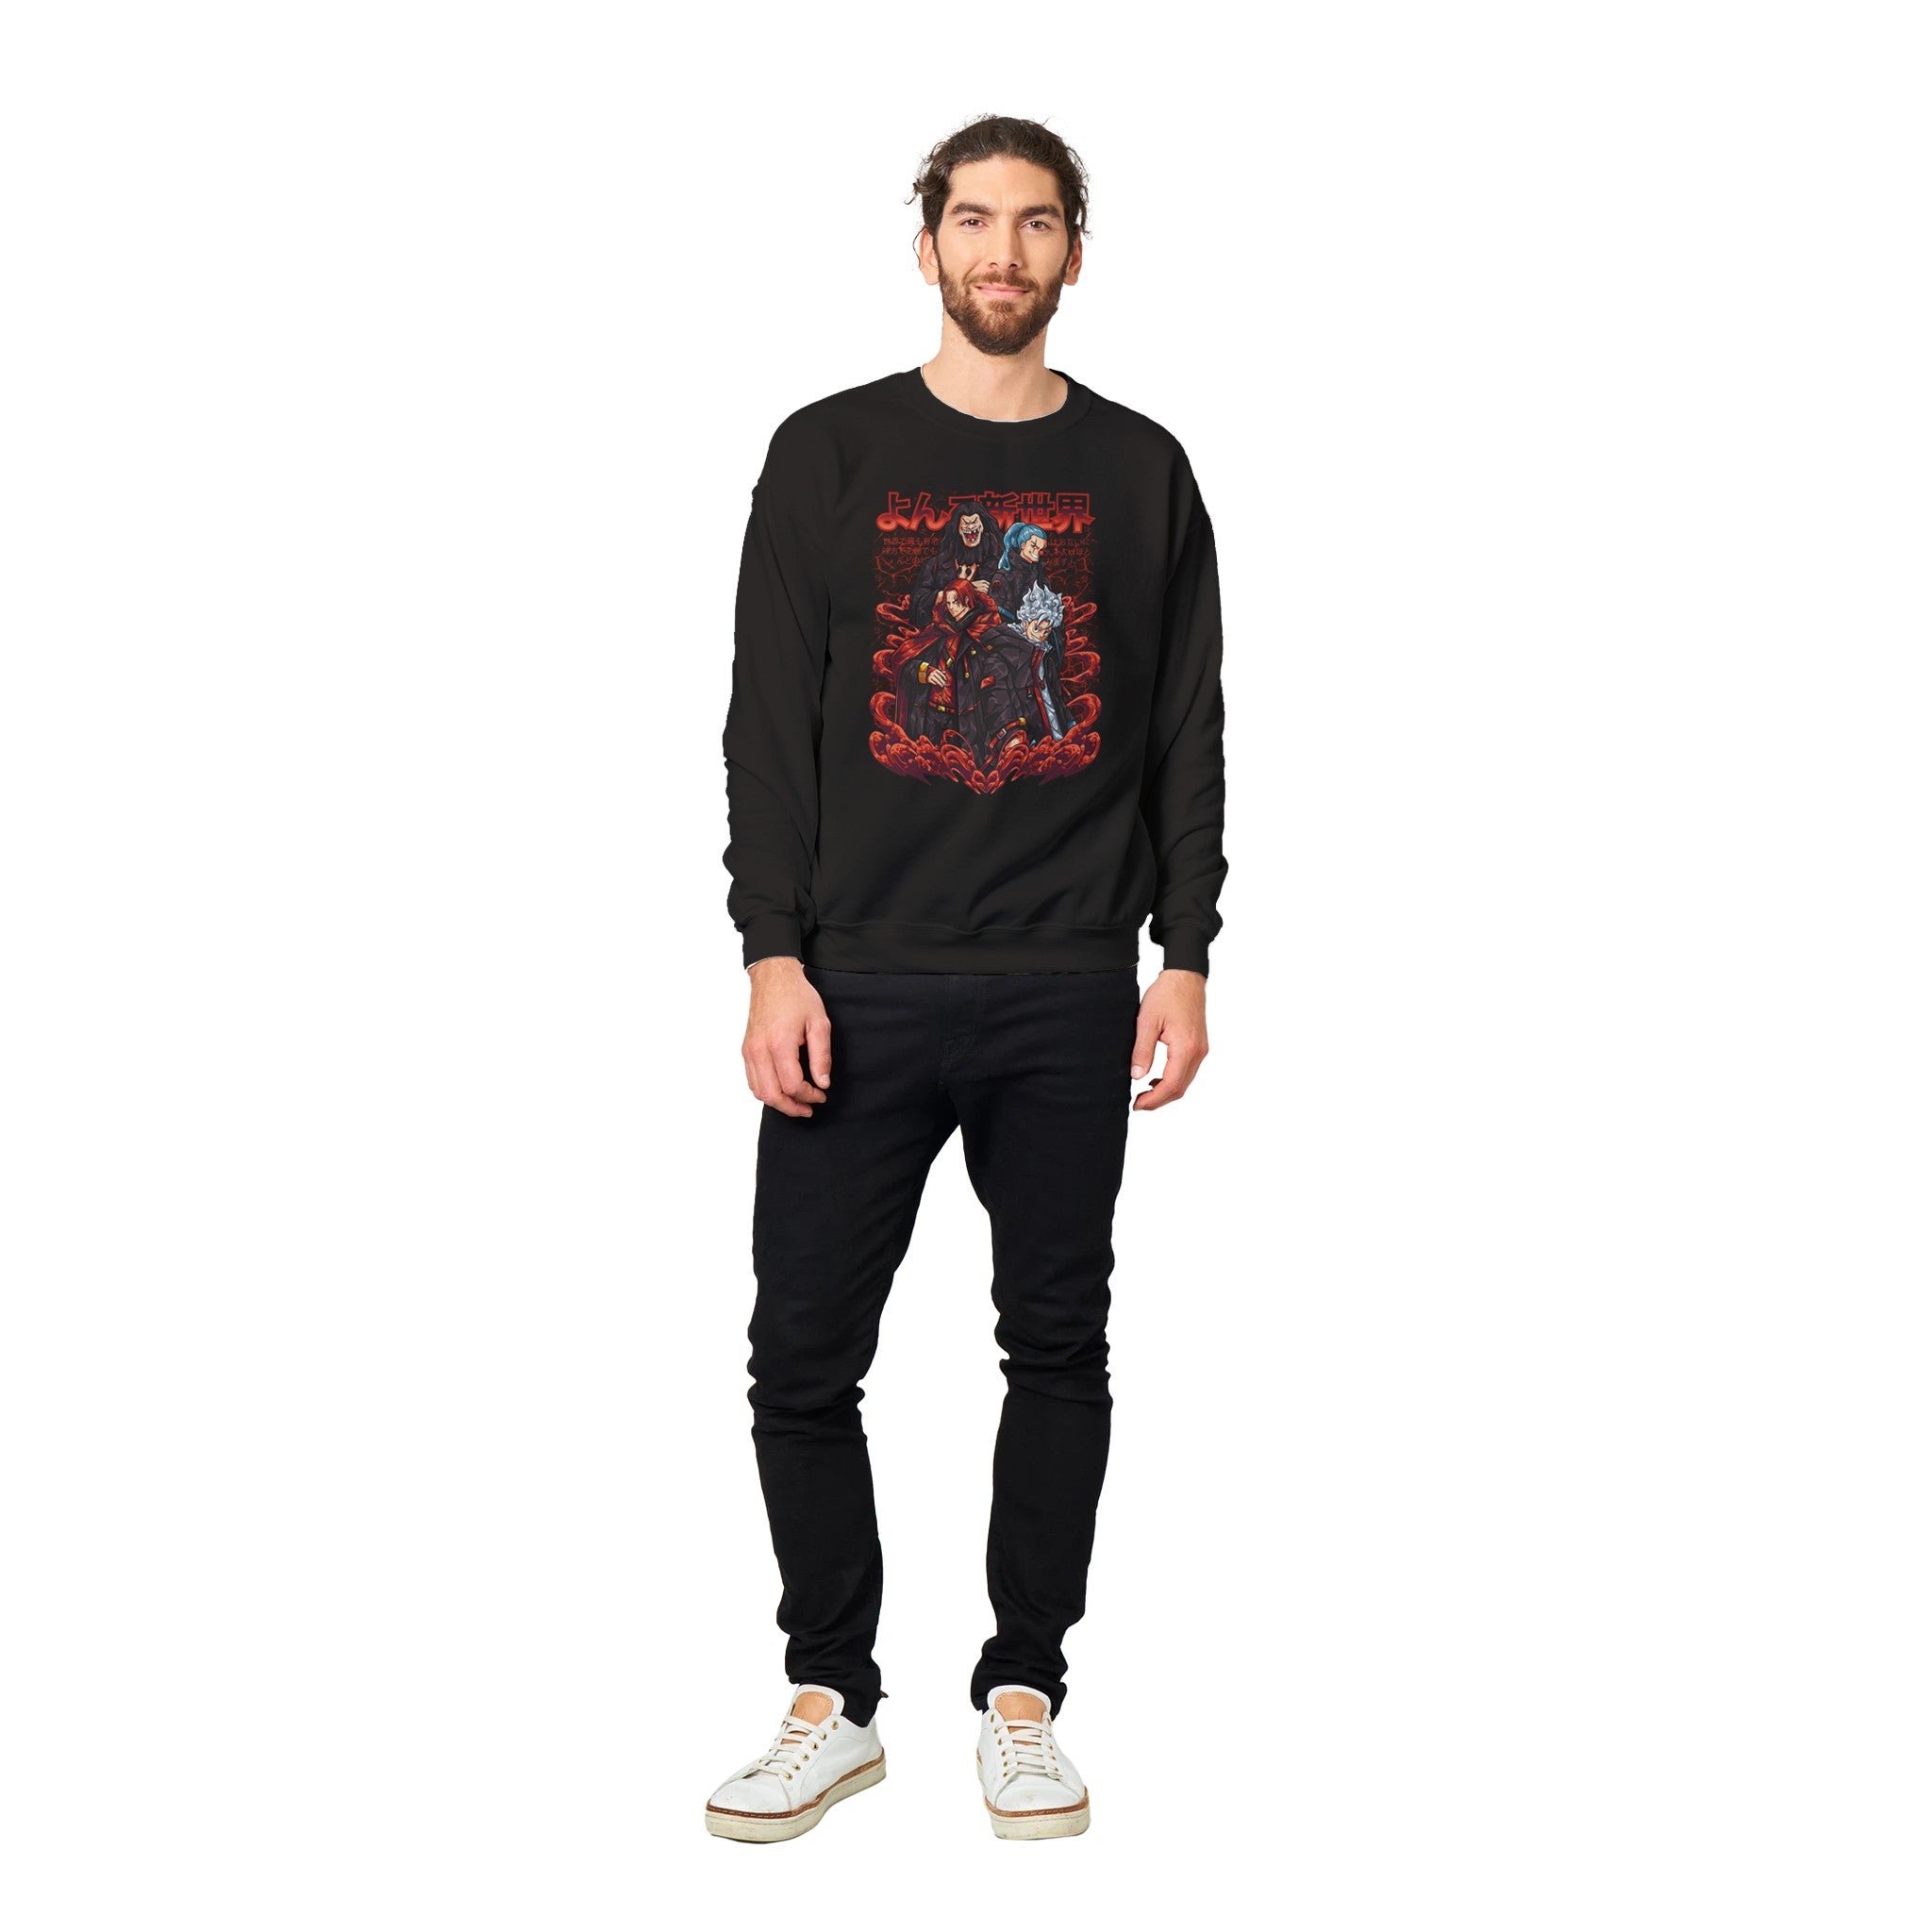 shop and buy one piece anime clothing sweatshirt/jumper